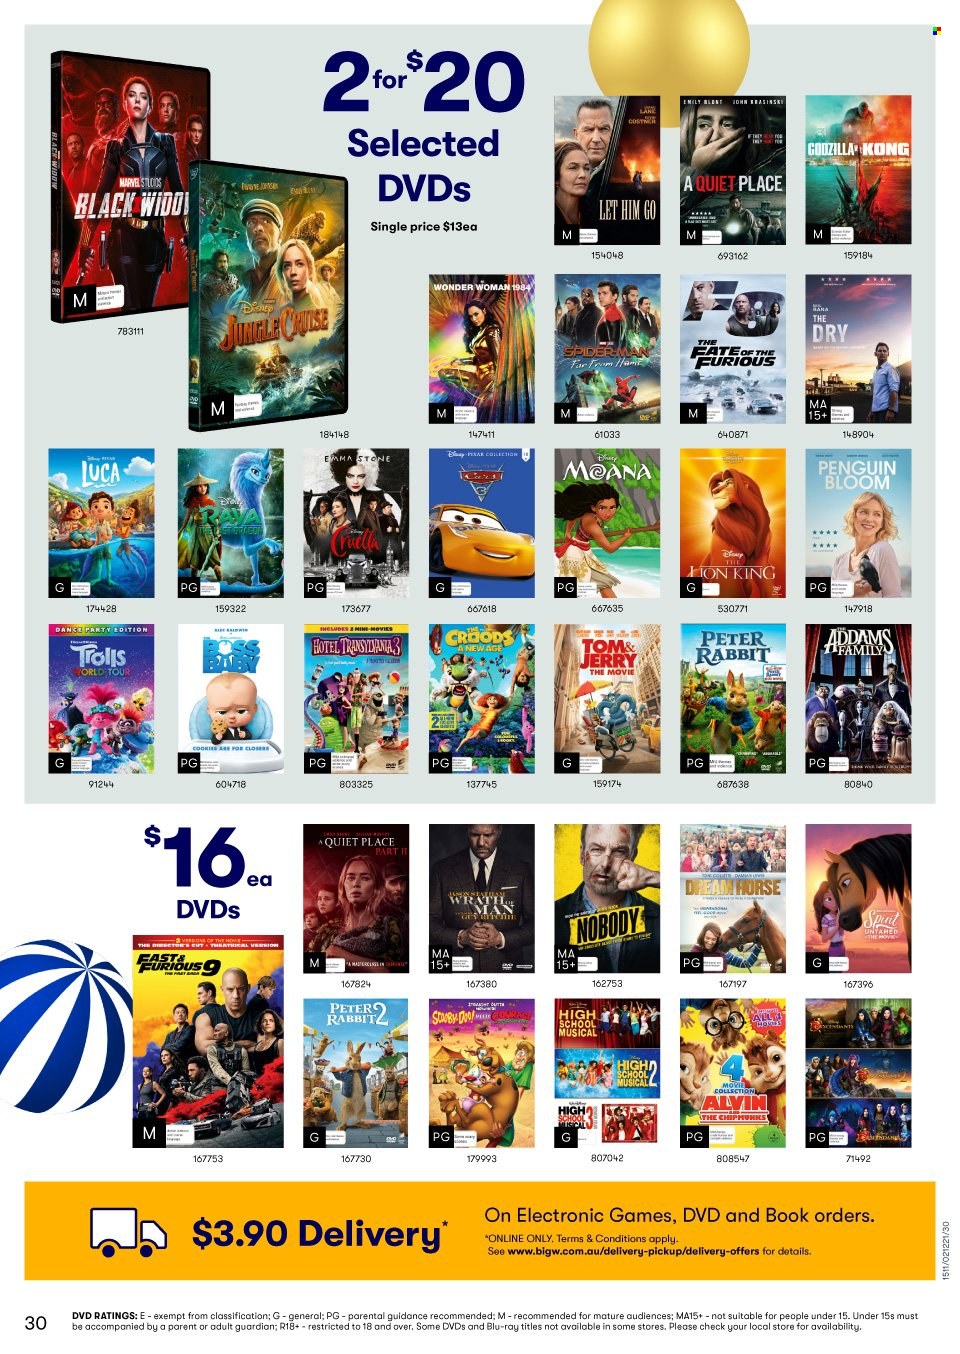 thumbnail - BIG W Catalogue - Sales products - DVD, book, Blu-ray. Page 30.